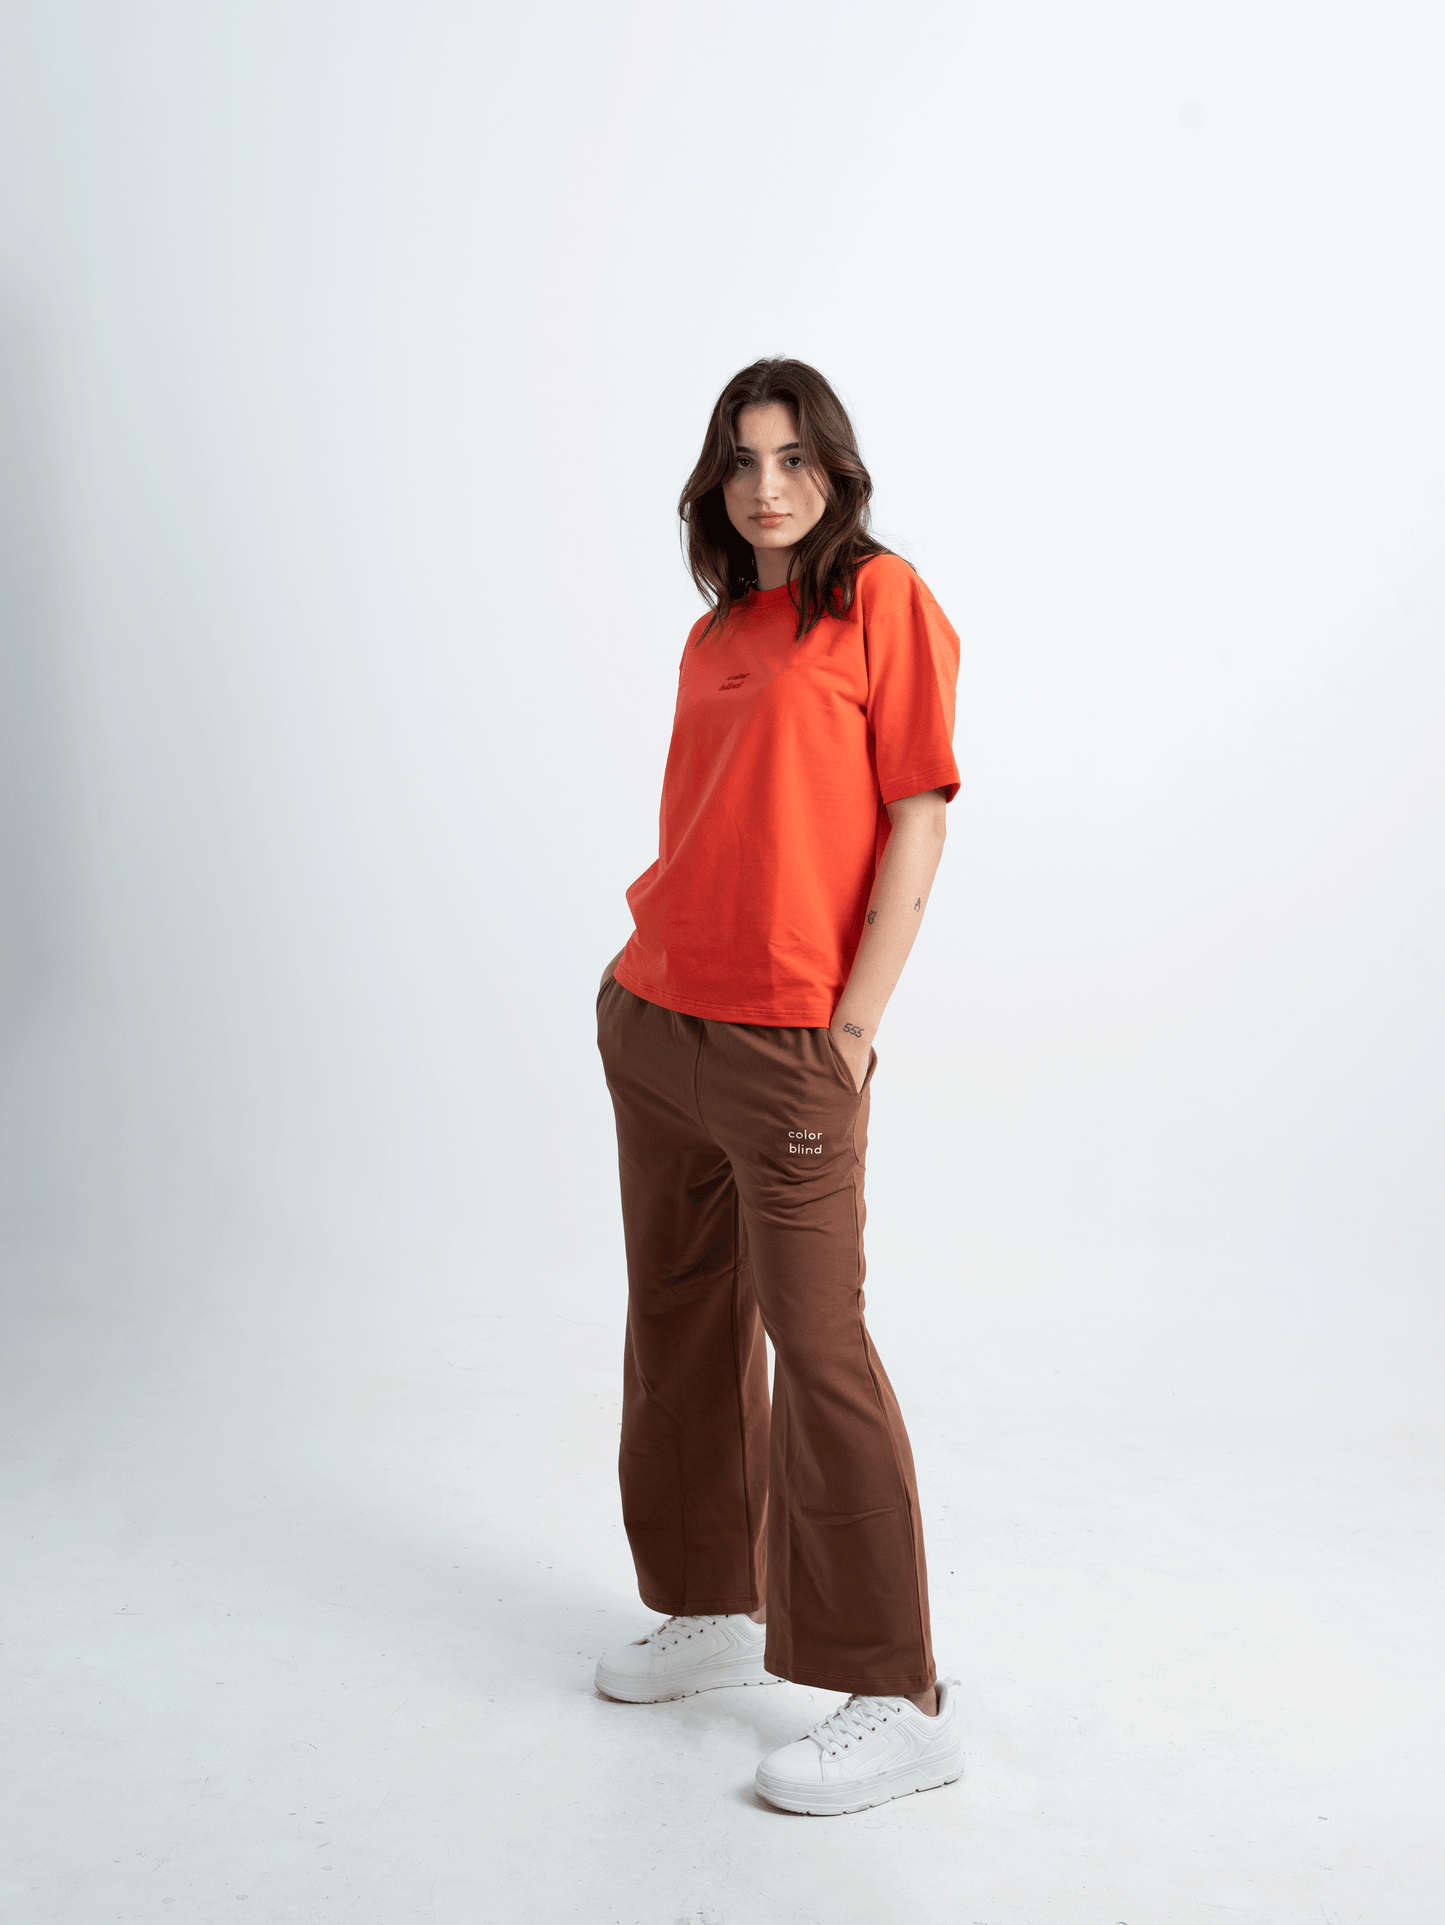 OAKY BROWN WOMEN'S RELAXED FIT PANTS